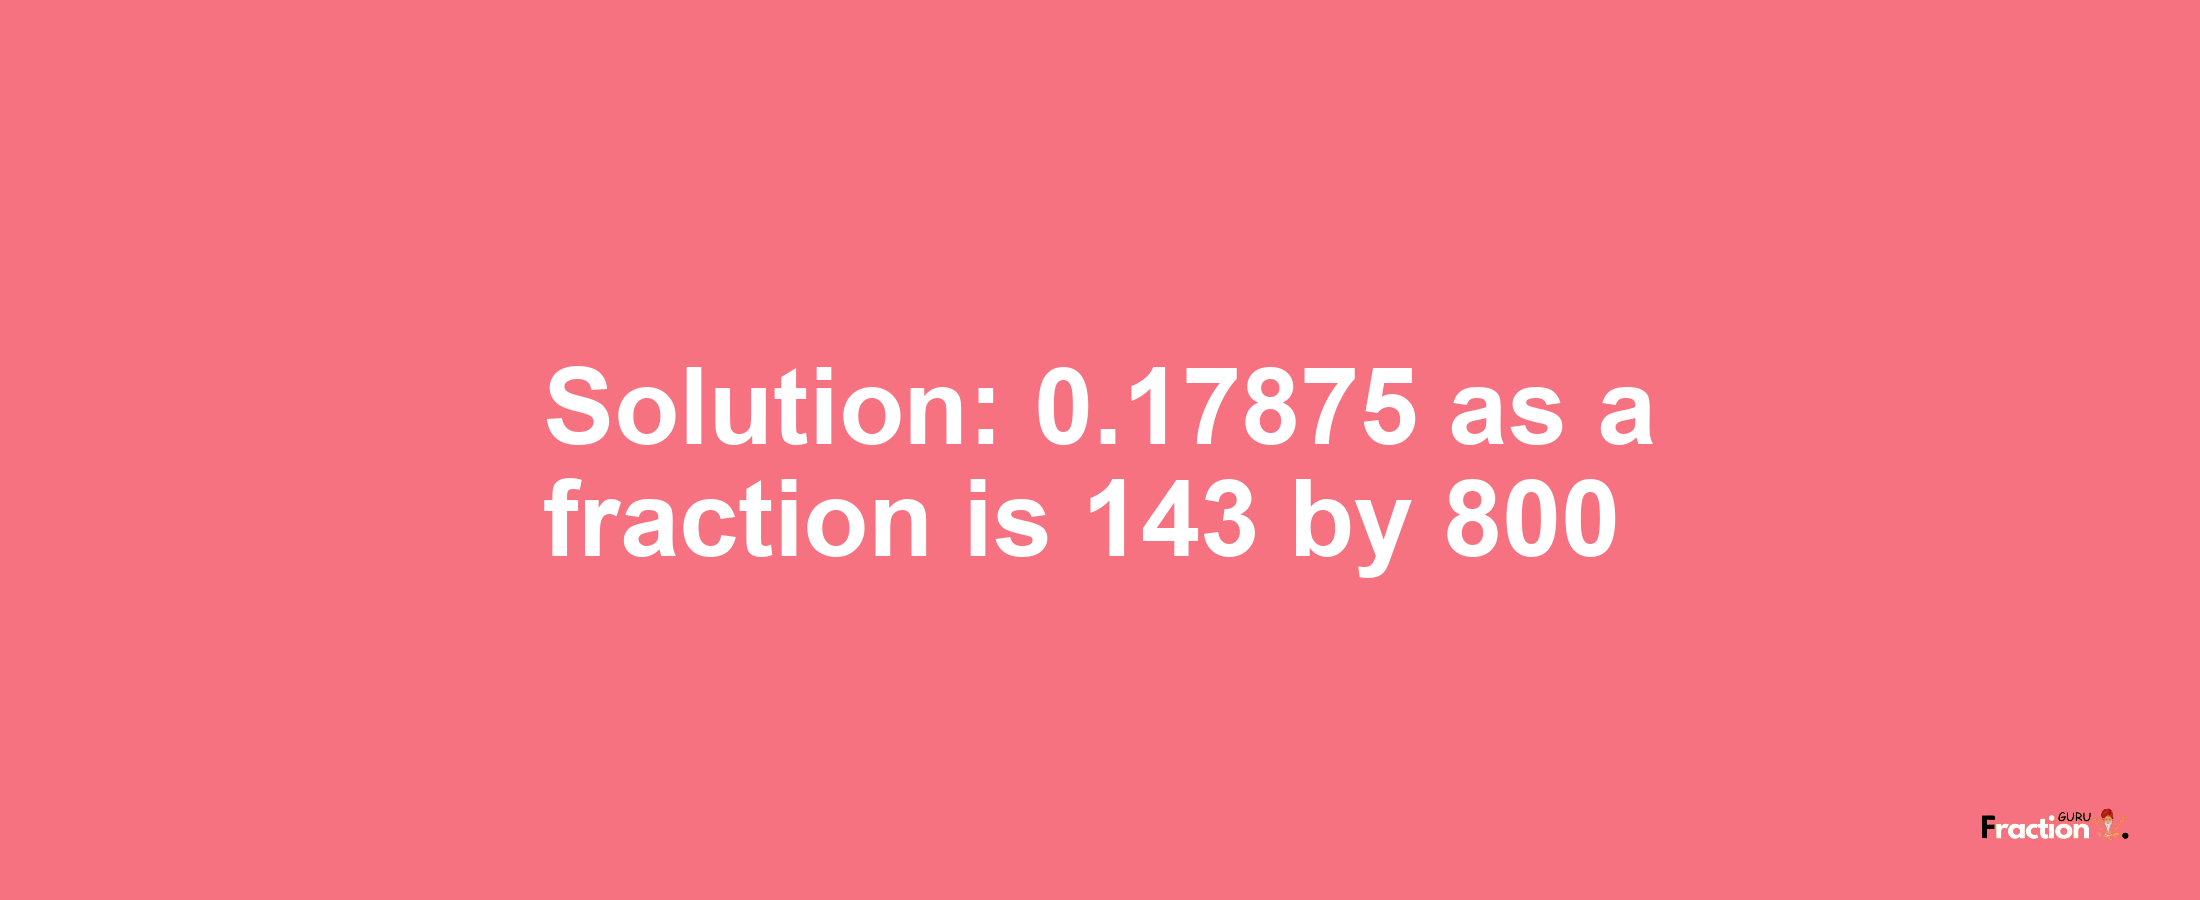 Solution:0.17875 as a fraction is 143/800